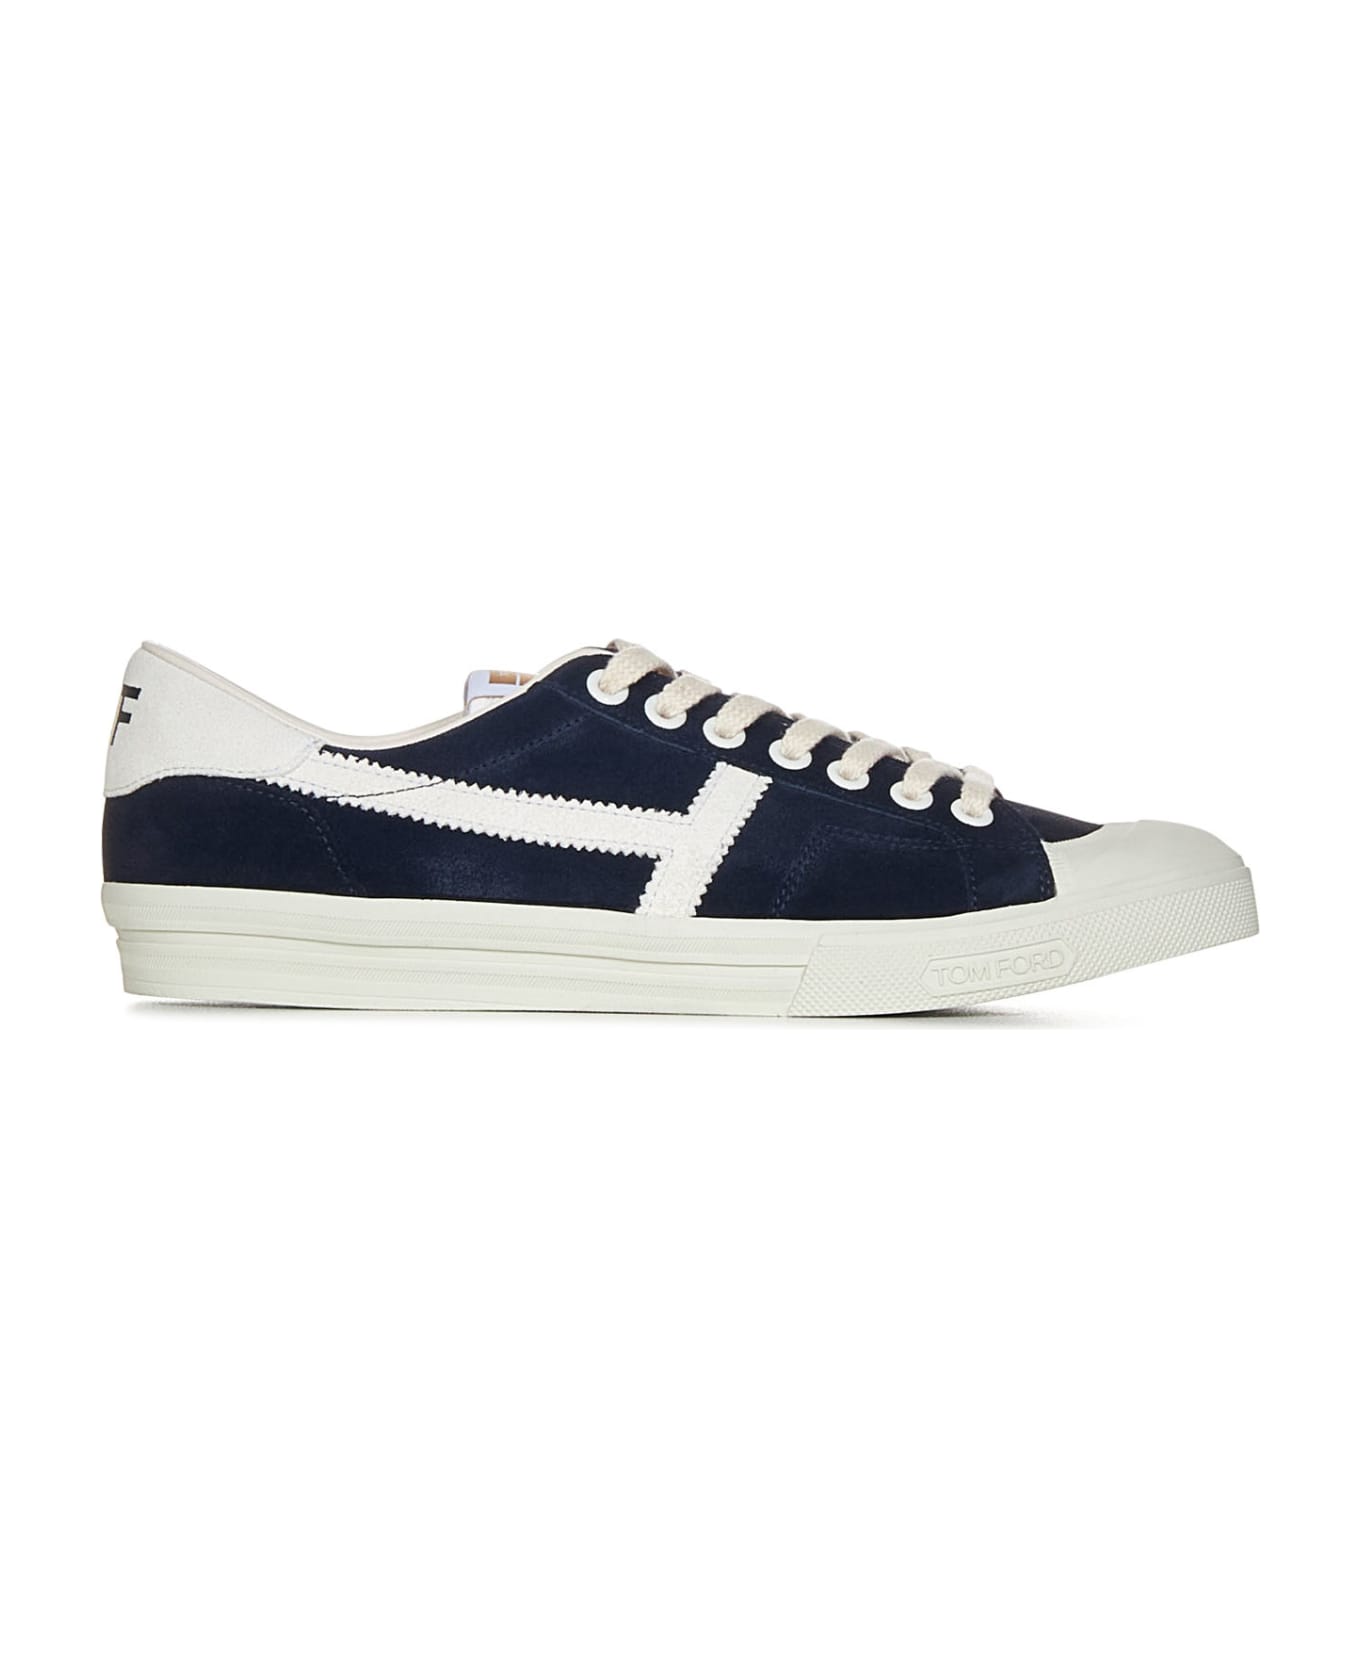 Tom Ford Jarvis Sneakers - Blue